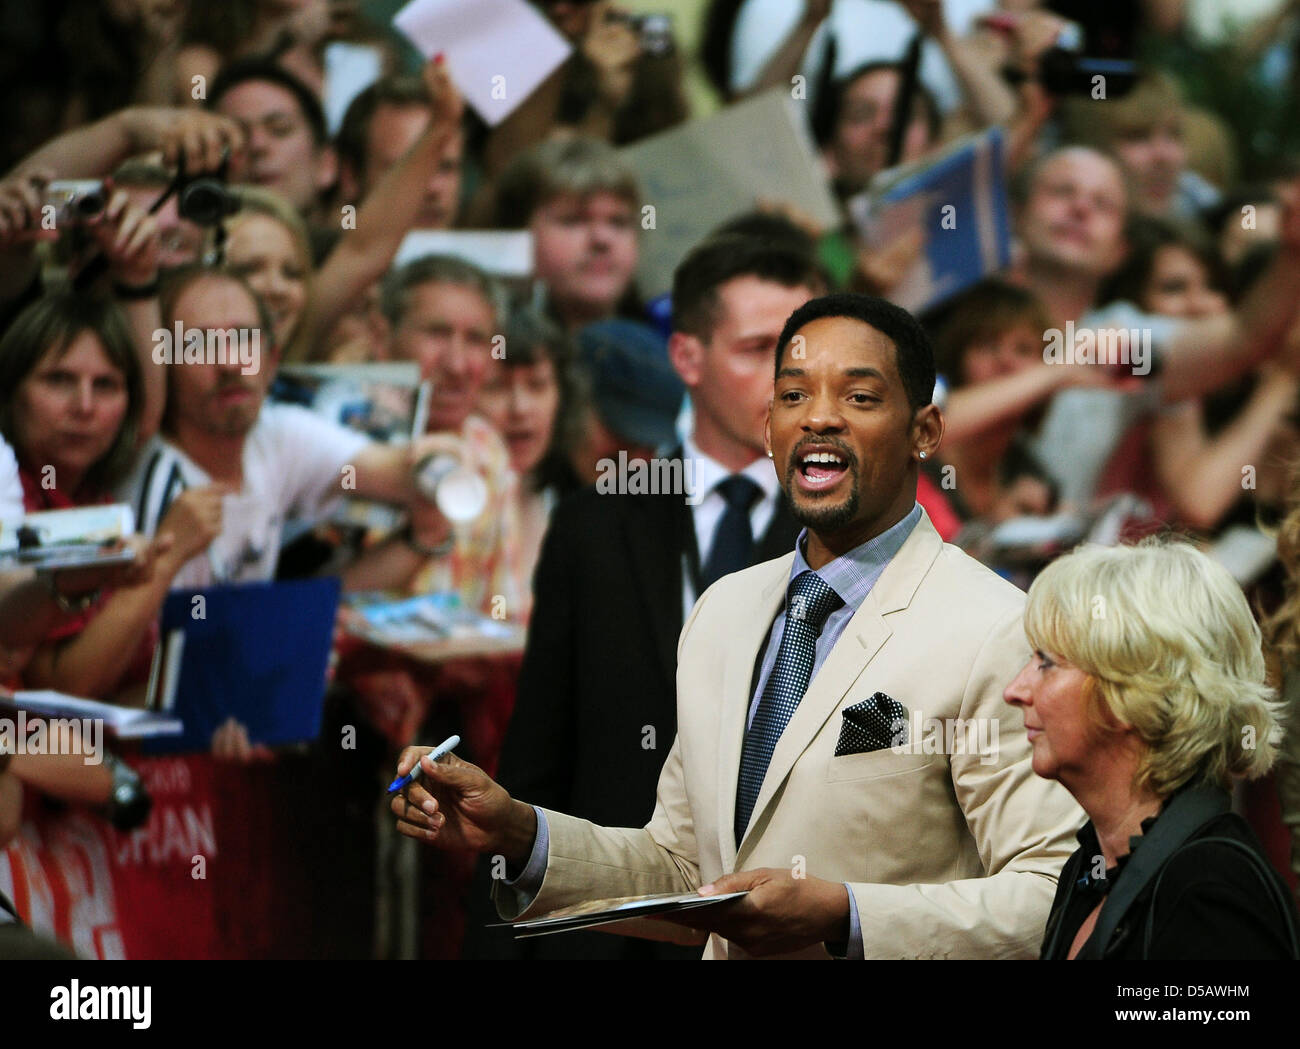 American actor Will Smith signs autographs on the red carpet at the premier of 'Karate Kid' in Berlin, Germany, 19 July 2010. The film will be shown in German cinemas starting 22 July 2010. Photo: Hannibal Hanschke Stock Photo